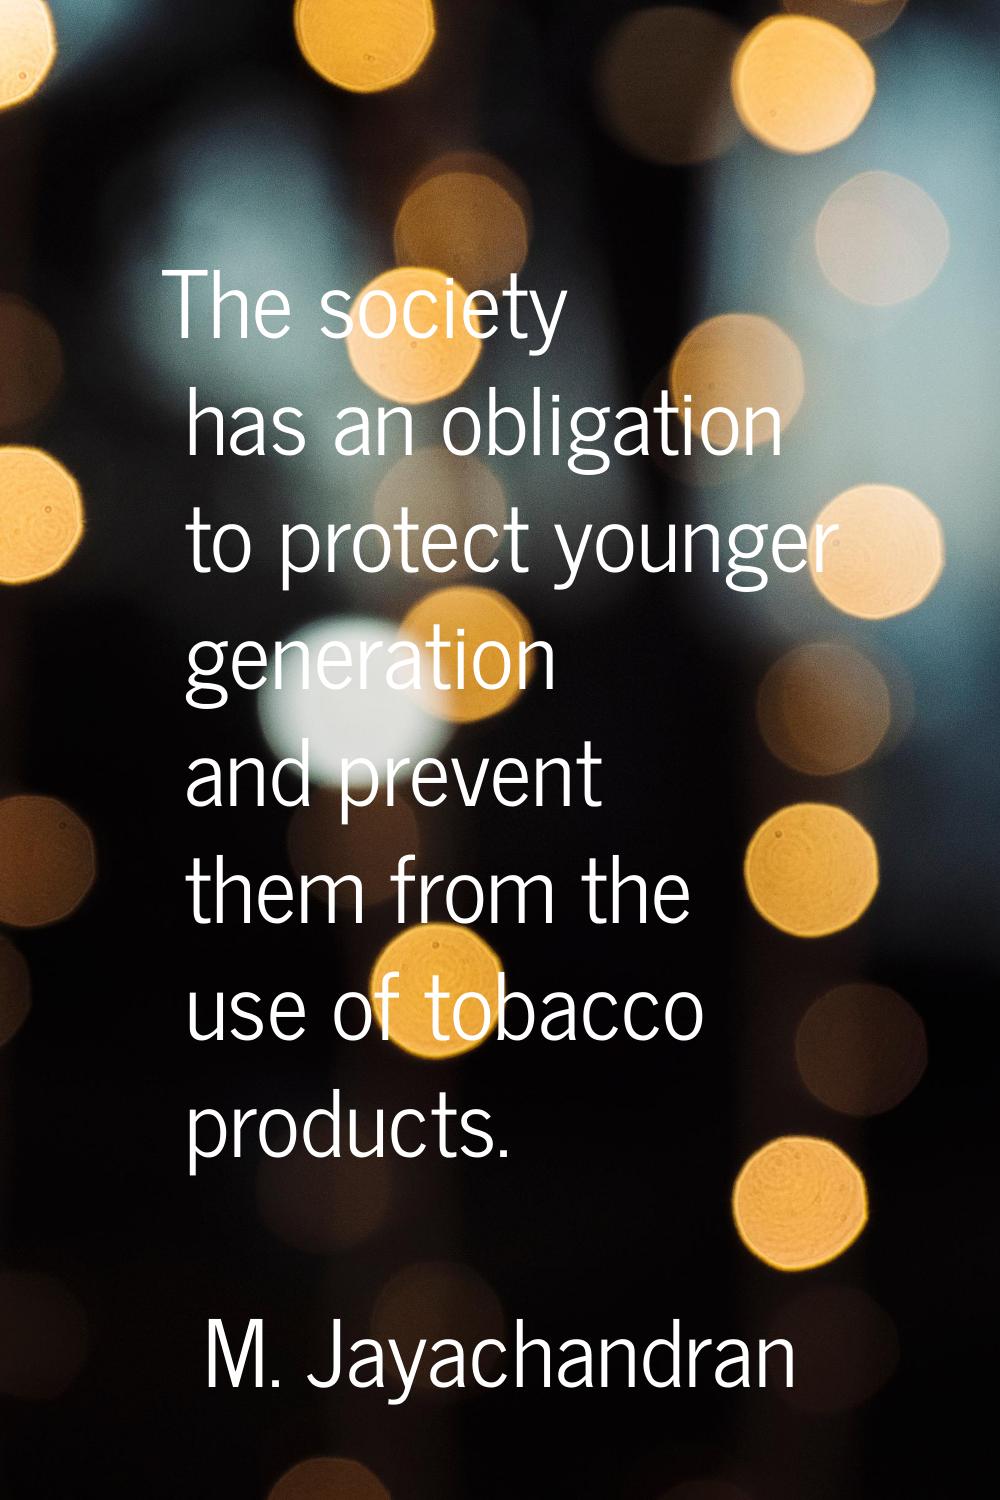 The society has an obligation to protect younger generation and prevent them from the use of tobacc